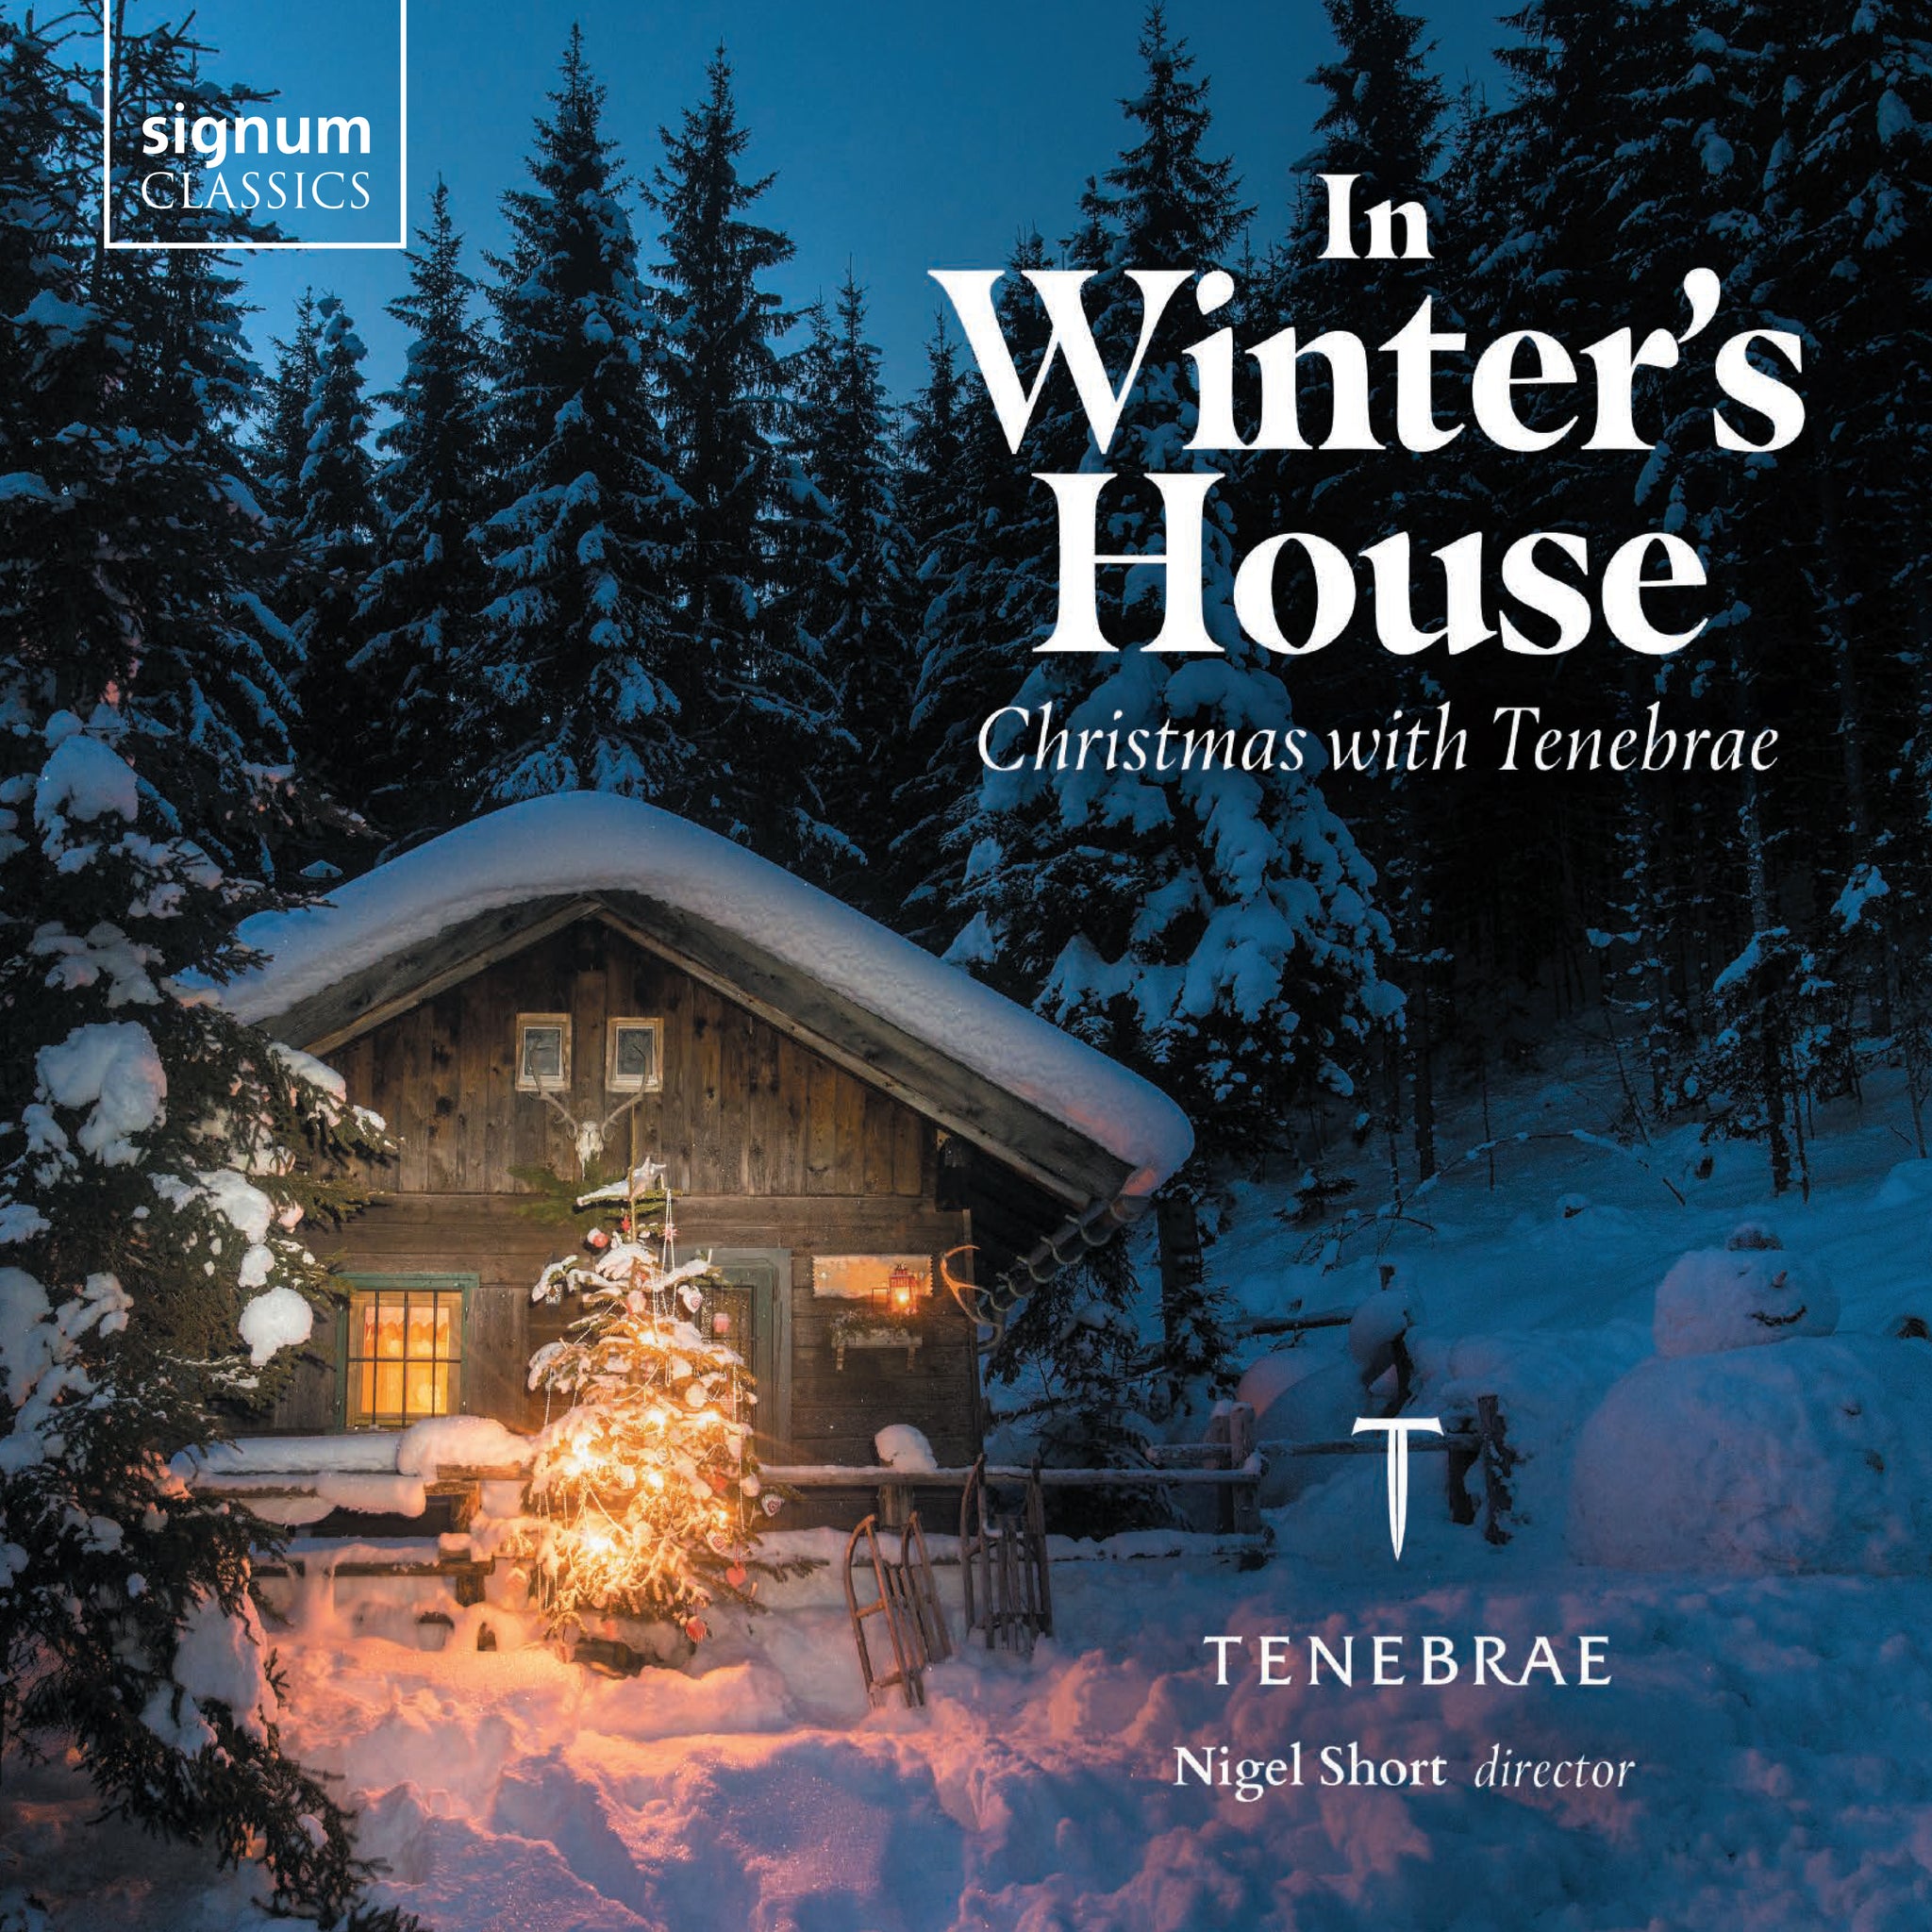 In Winter's House: Christmas with Tenebrae